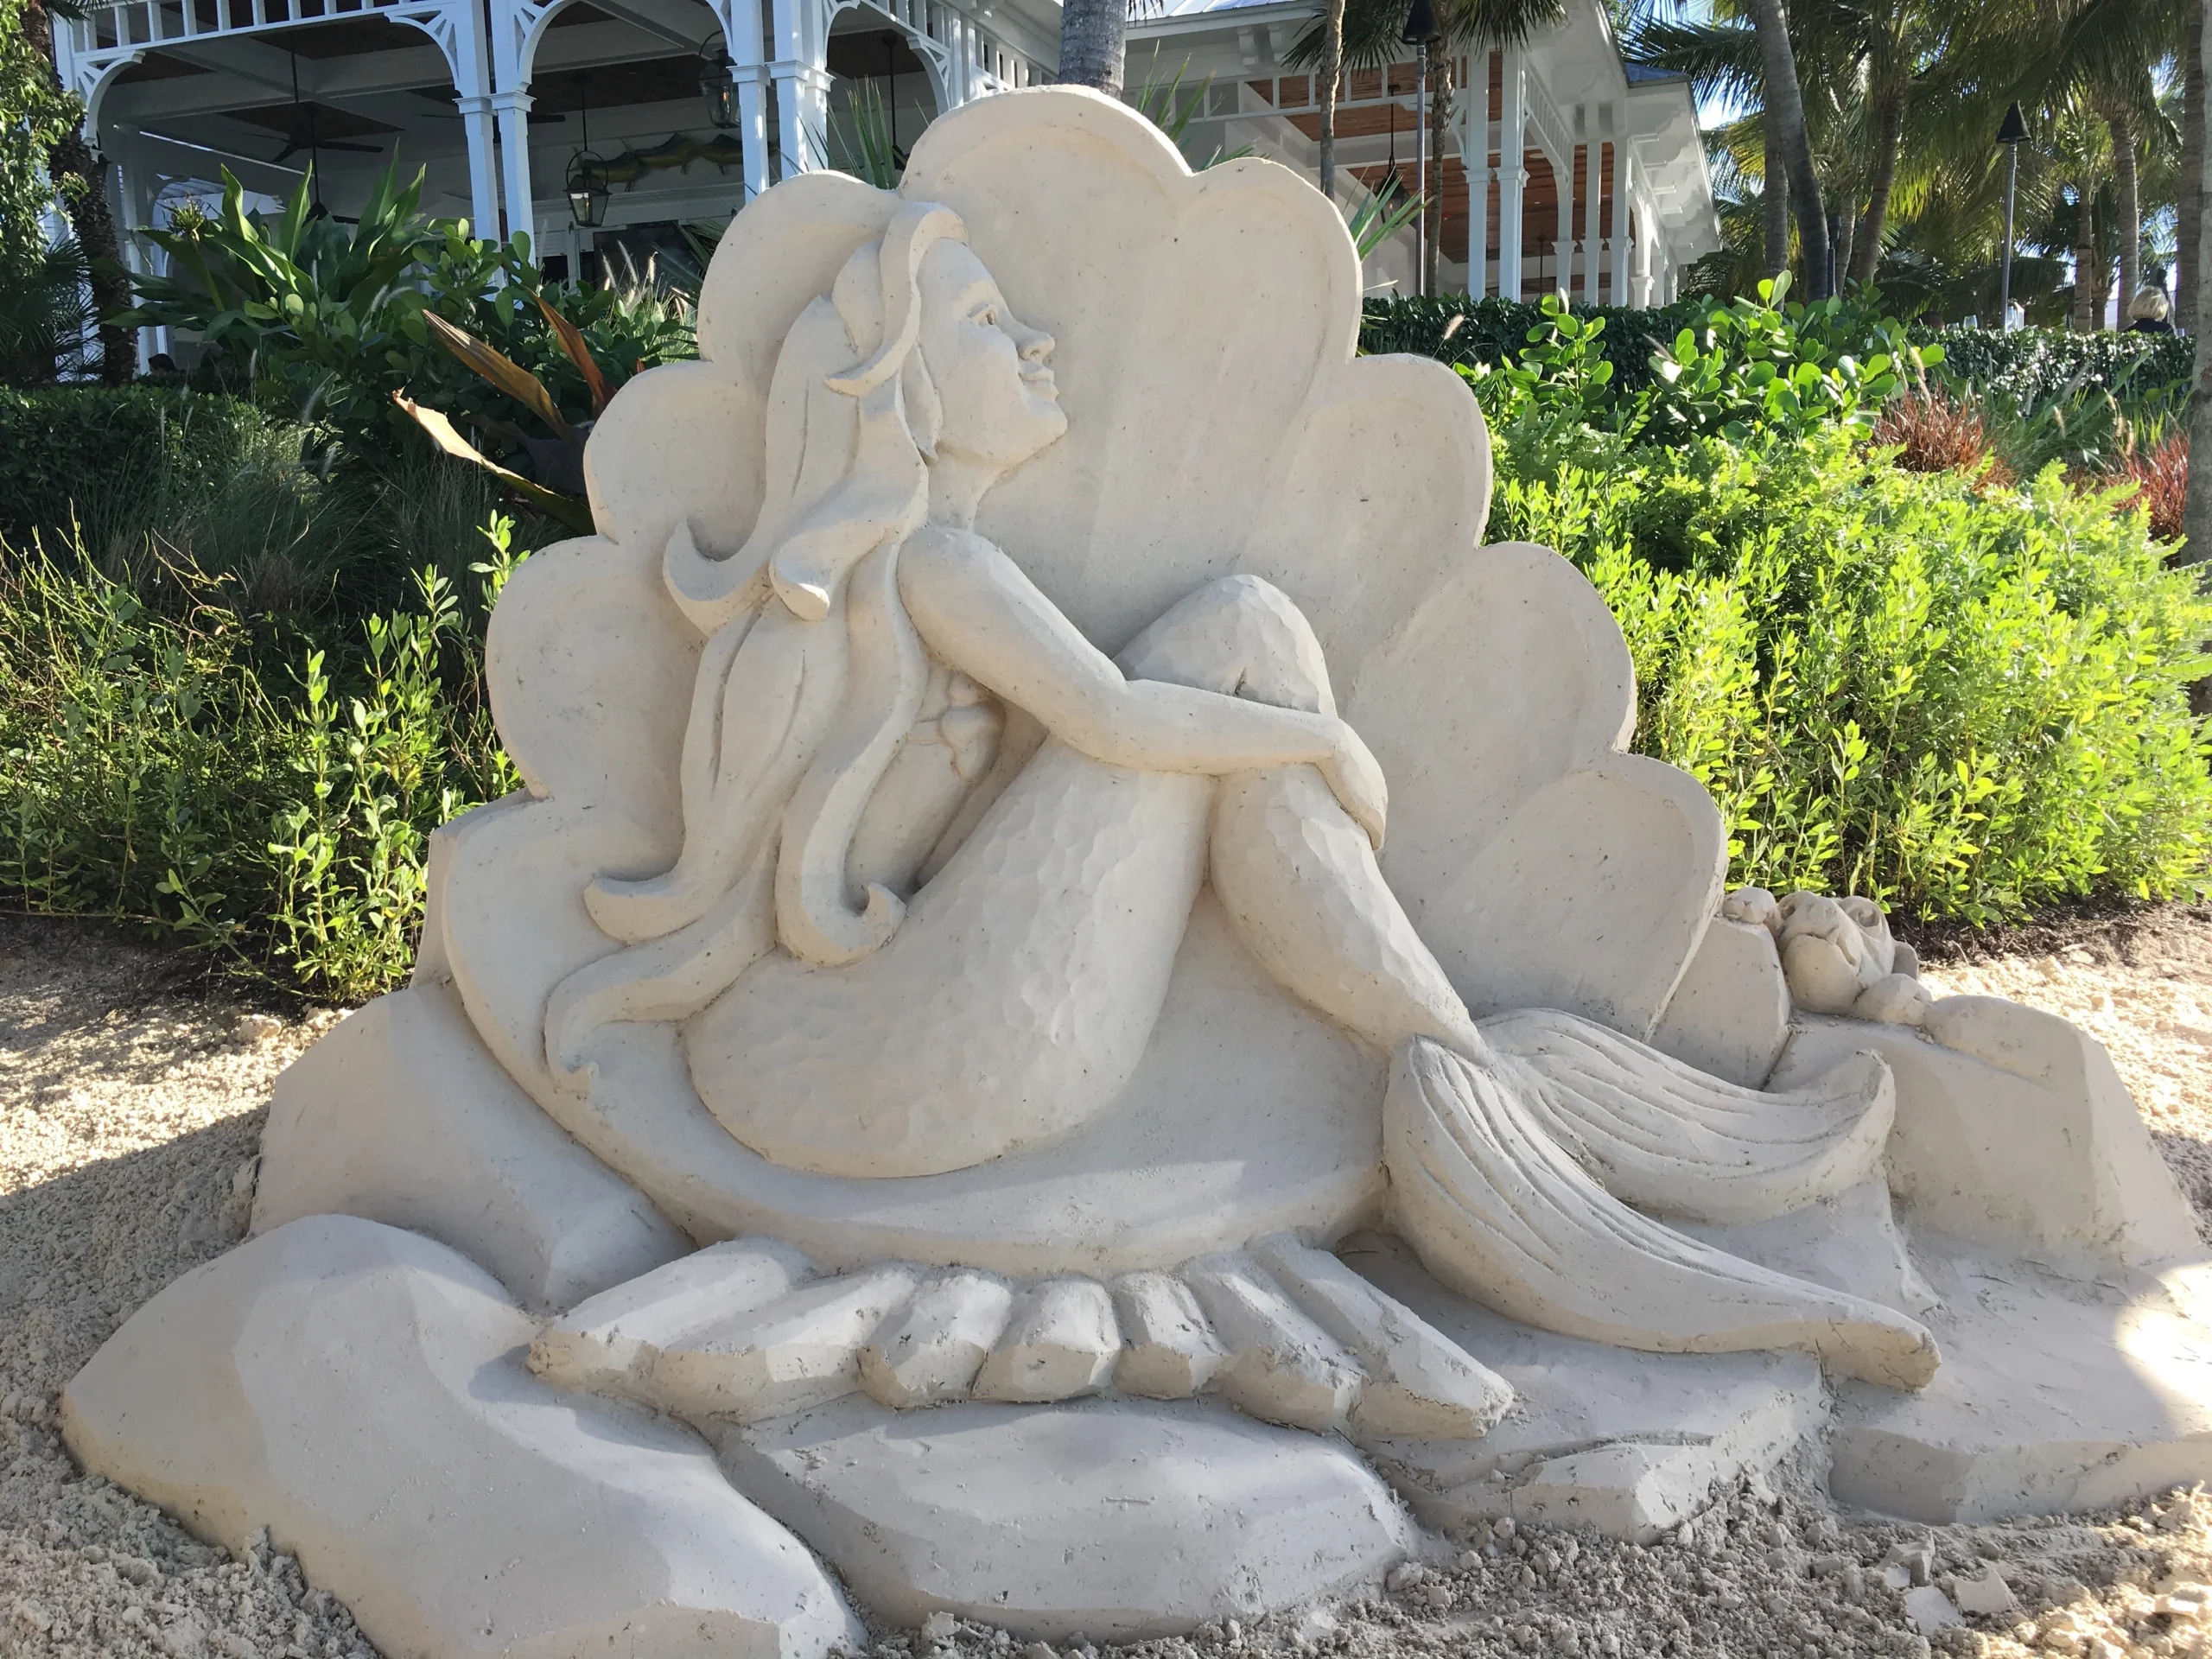 A photo of a sand sculpture of a beautiful mermaid sitting in a clamshell, looking off into the distance. It was made in front of a Florida restaurant with historic architecture.